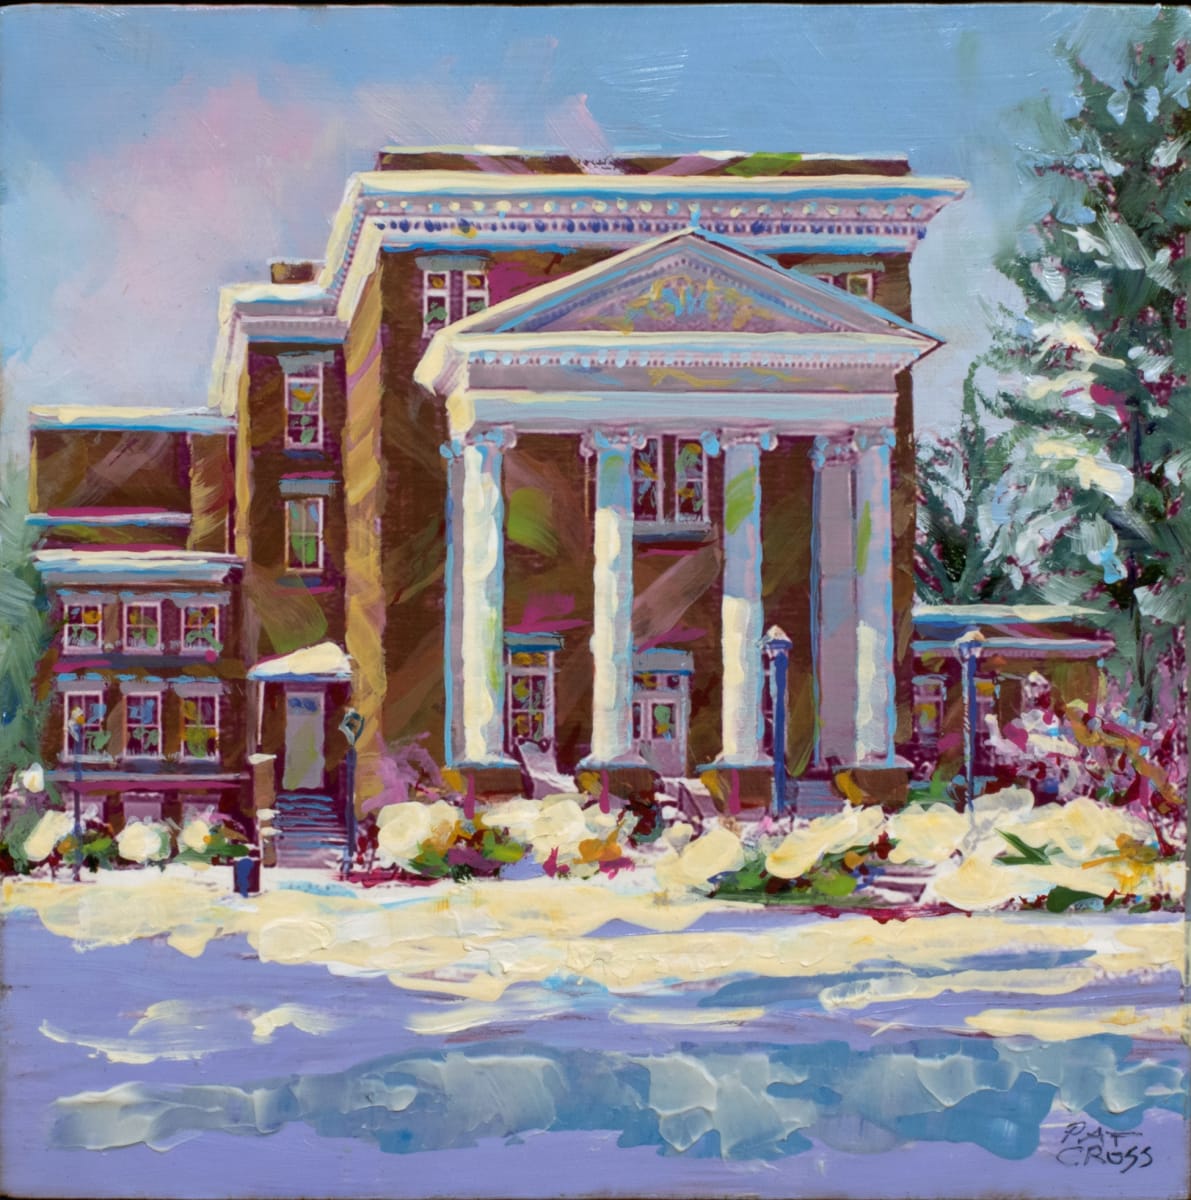 Carnegie Hall Winter by Pat Cross  Image: Painting